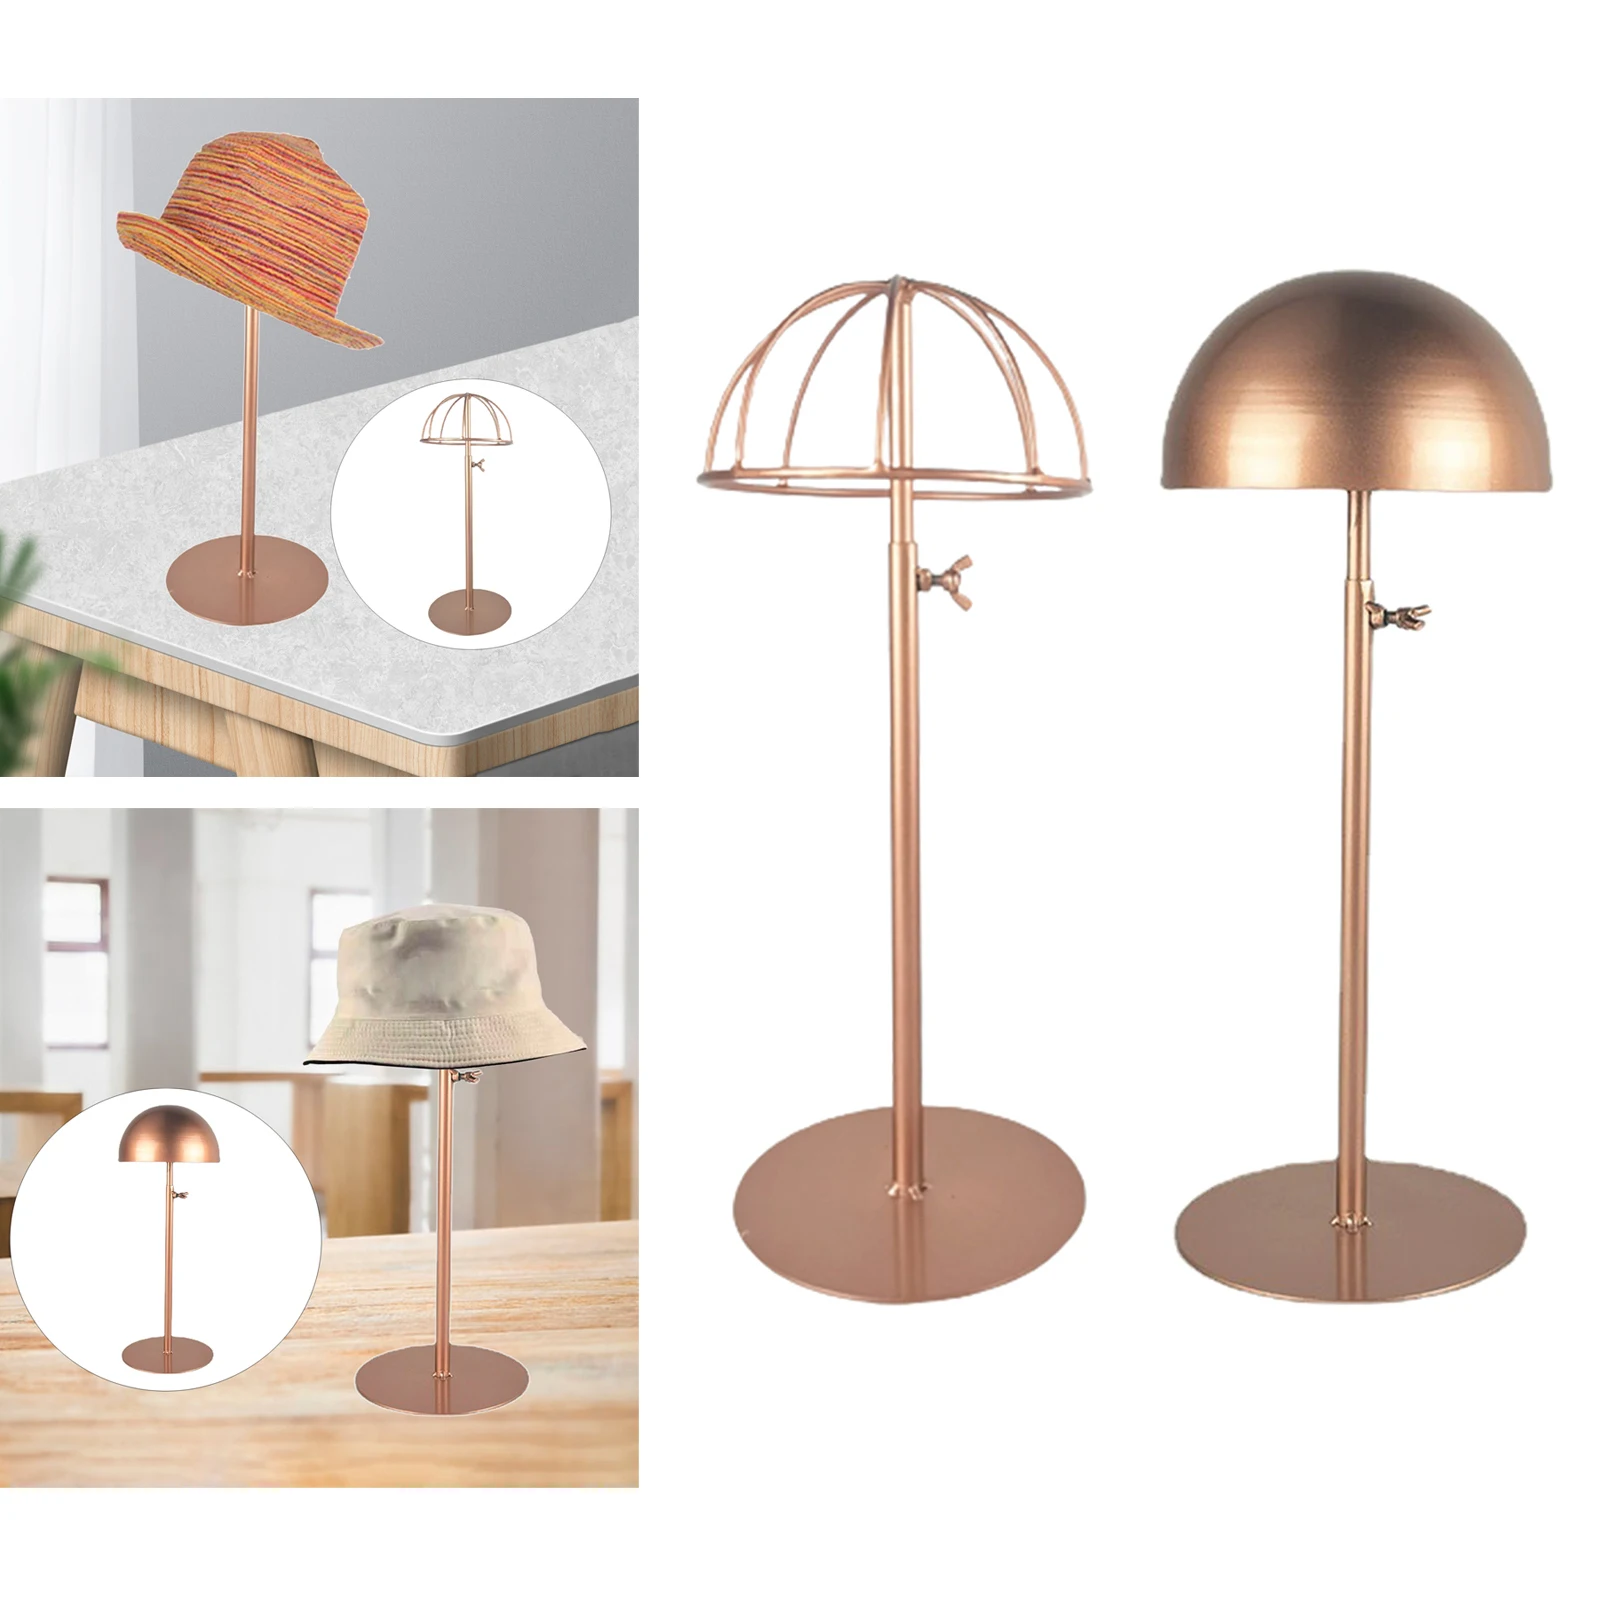 Antique Style Adjustable Free Standing Metal Hat Holder Wig Styling Fedora Bonnet Display Stand for Cloakroom